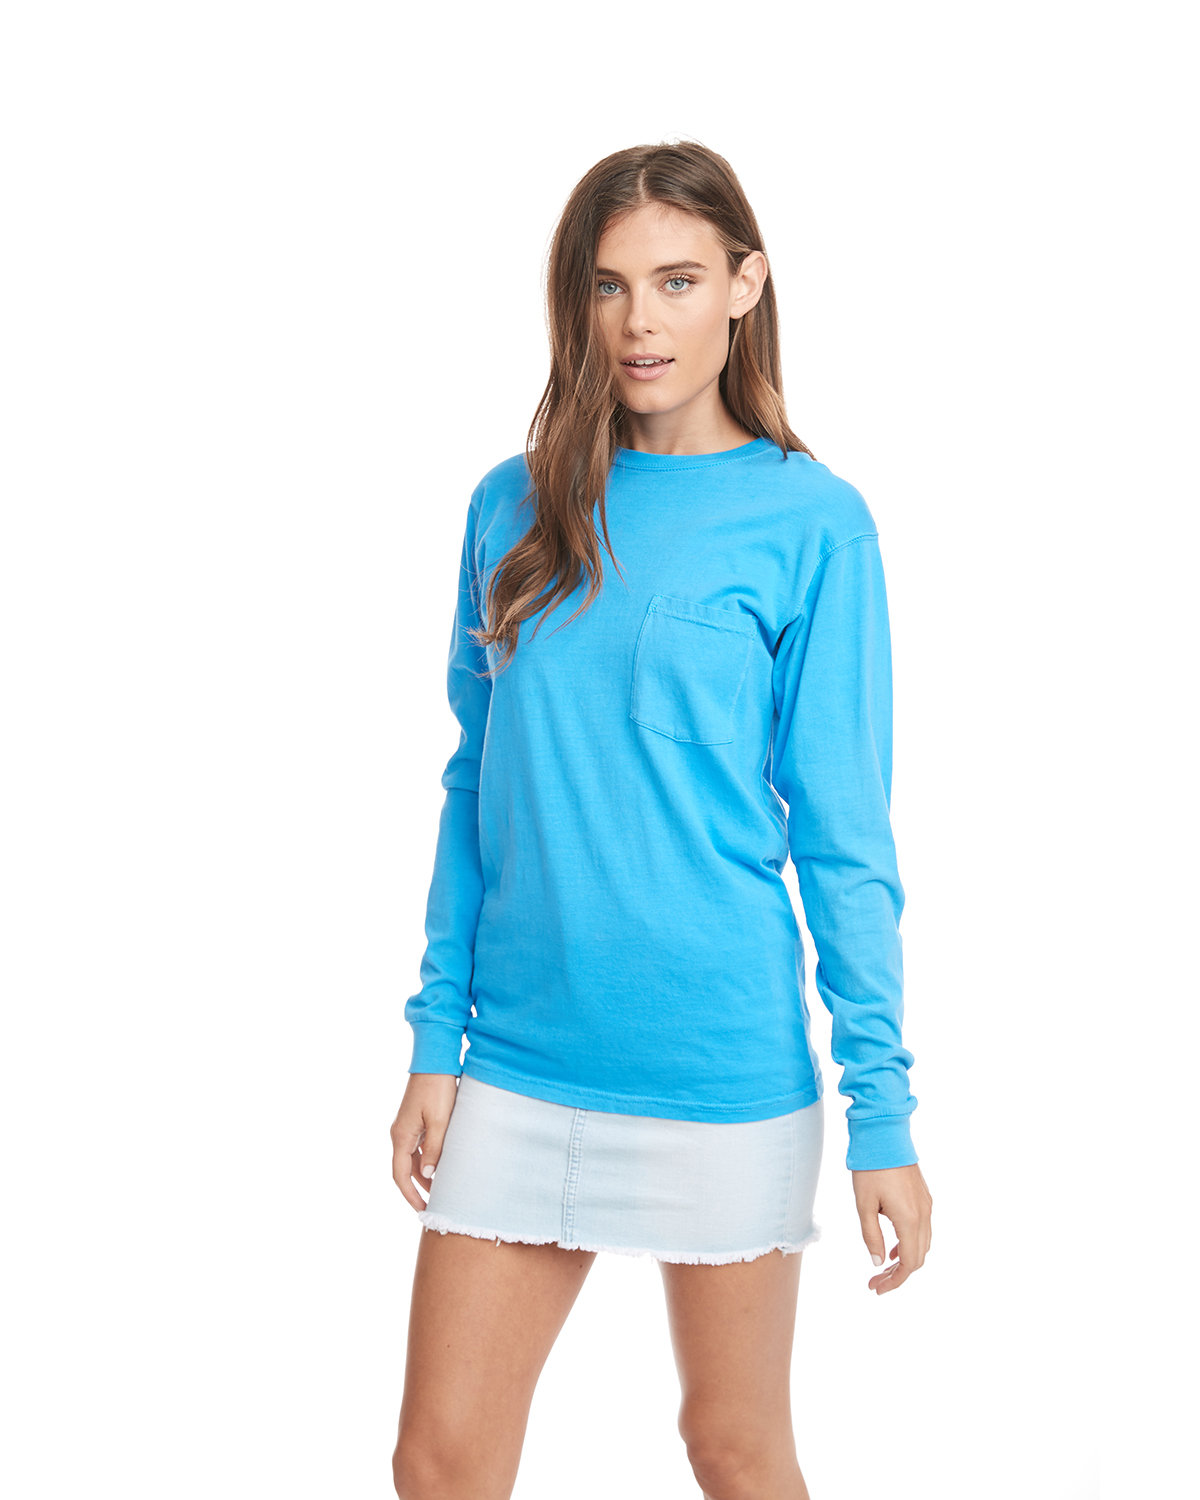 Next Level Apparel Adult Inspired Dye Long-Sleeve Crew with Pocket OCEAN 